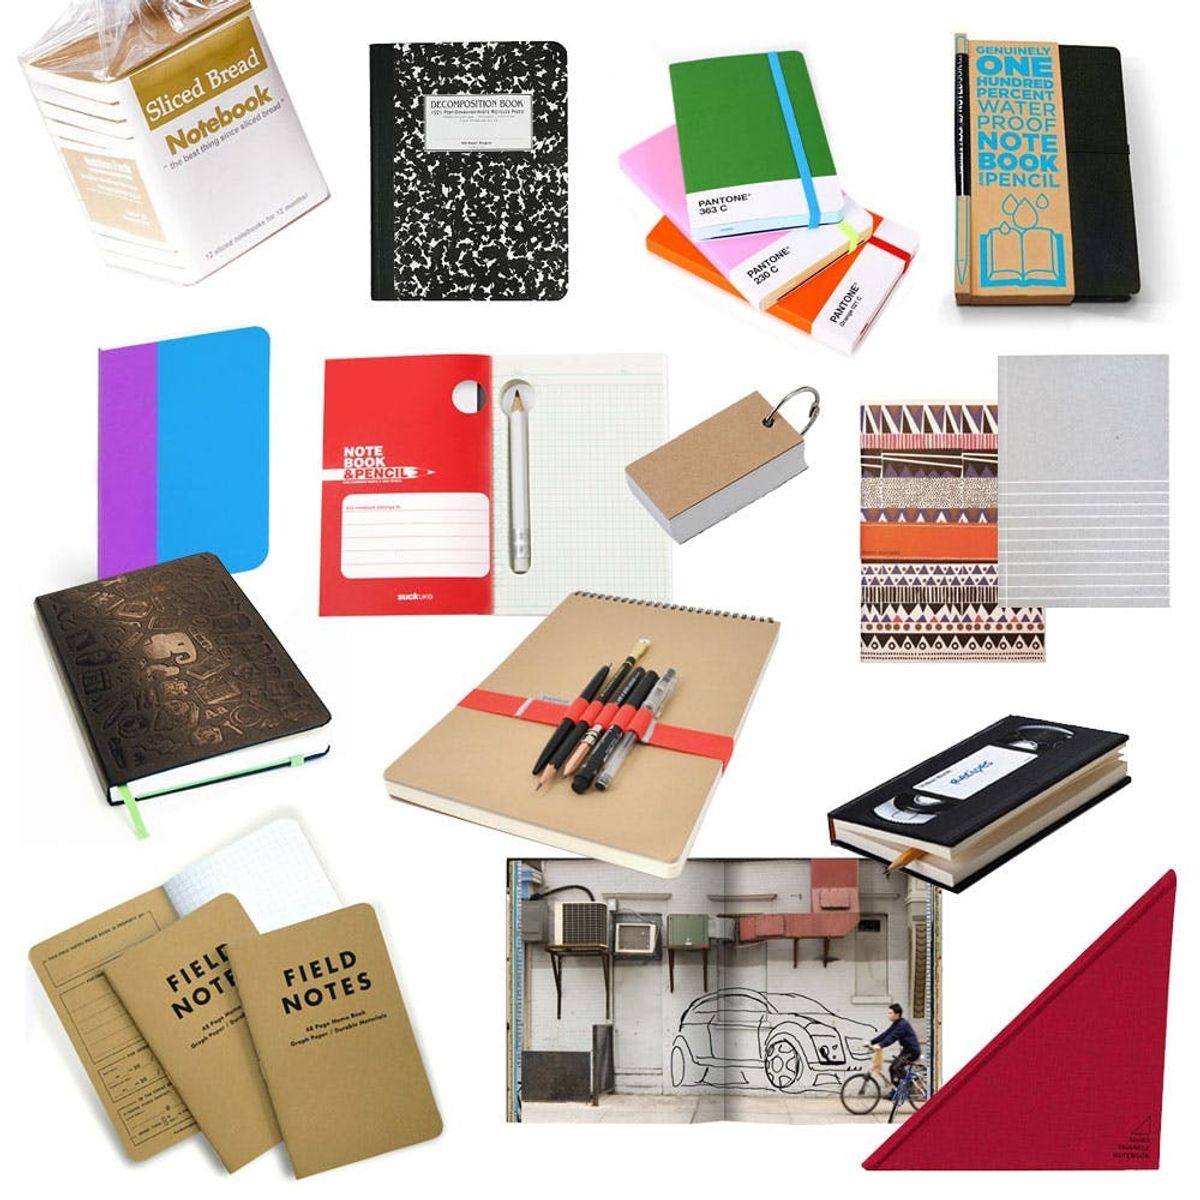 15 Noteworthy Notebooks for Jotting, Doodling, and Sketching